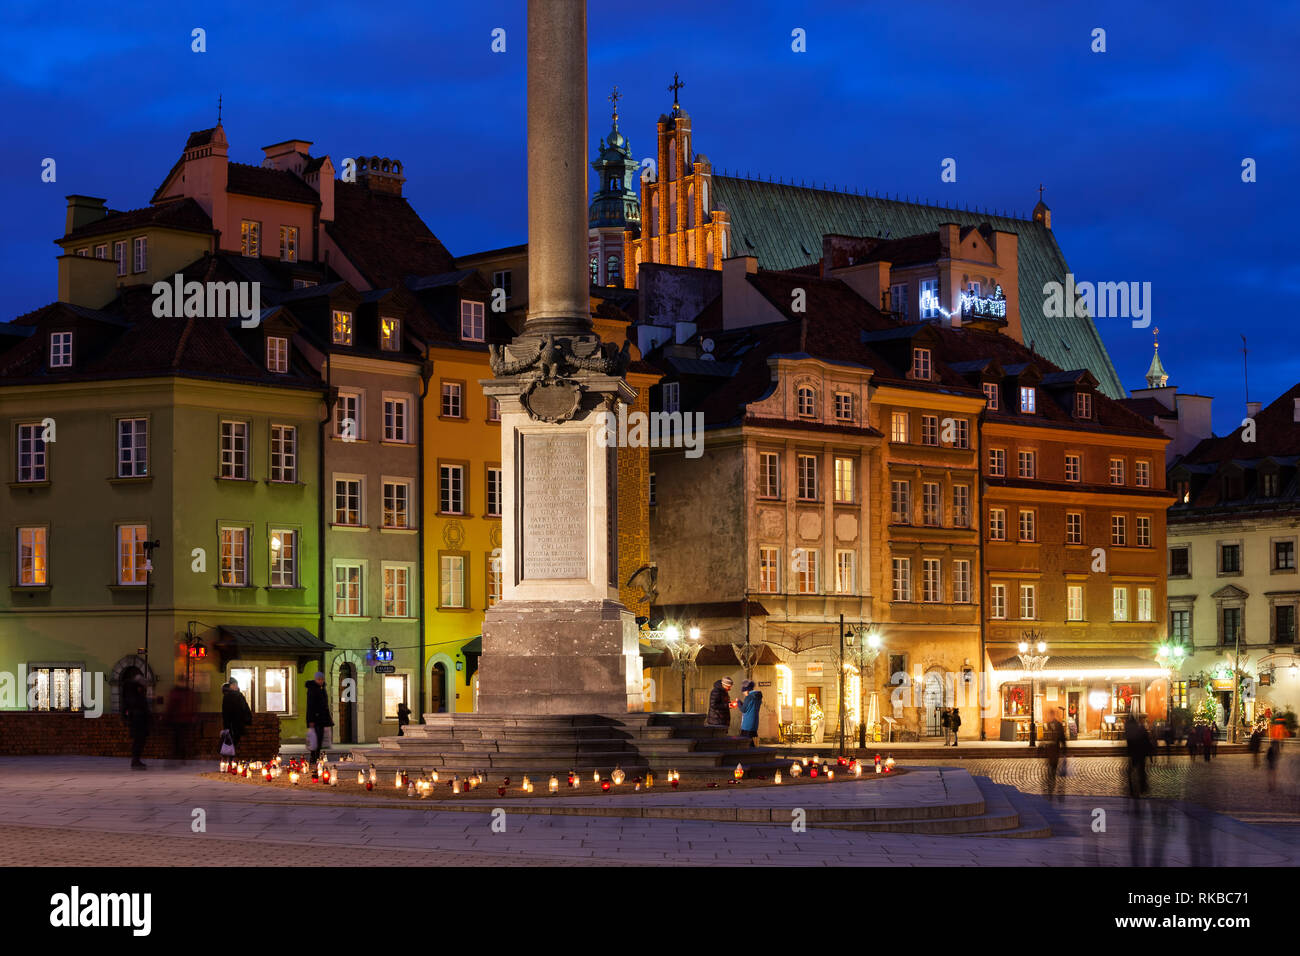 City of Warsaw by night, capital of Poland, Old Town colorful tenement houses and base of the Zygmunt's Column. Stock Photo